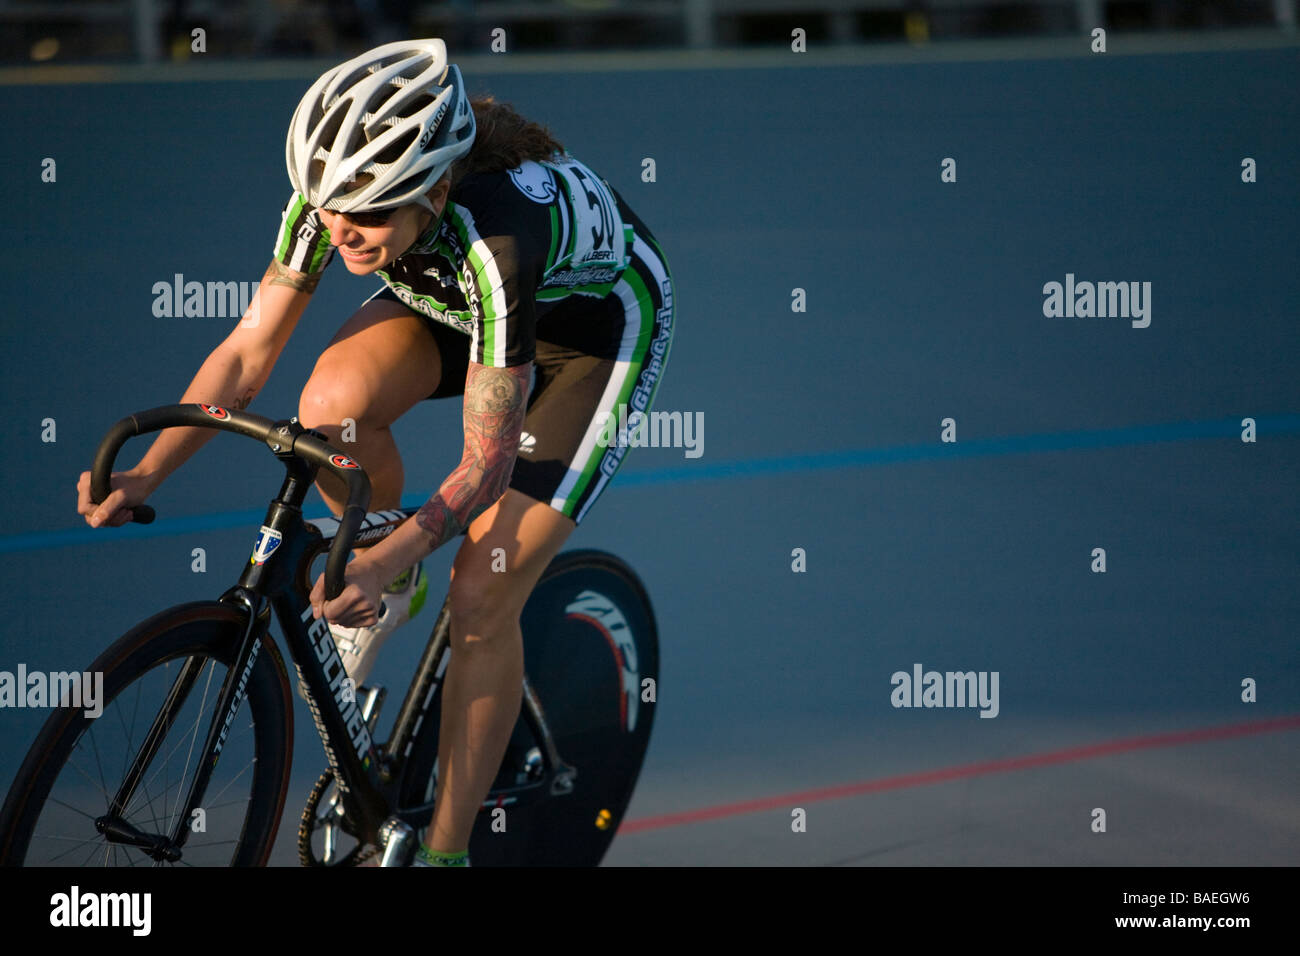 ILLINOIS Northbrook Woman bicyclist ahead of competitors during bicycle race at velodrome track Stock Photo